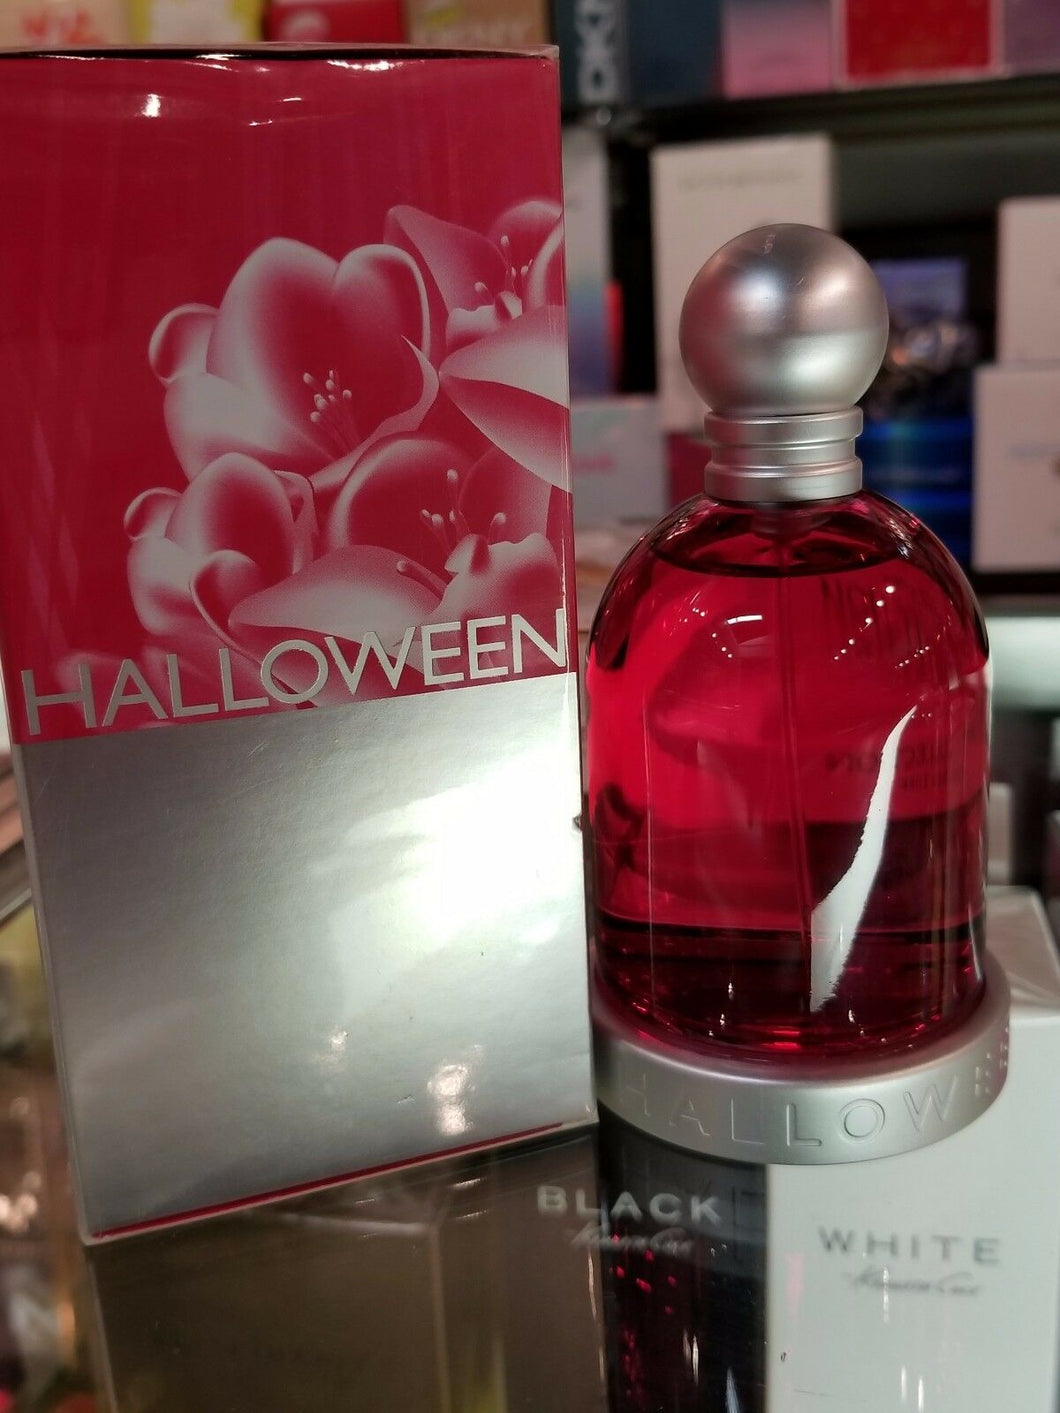 Halloween Freesia By J. Del Pozo 3.3 / 3.4oz. EDT Spray For Women SEALED IN BOX - Perfume Gallery